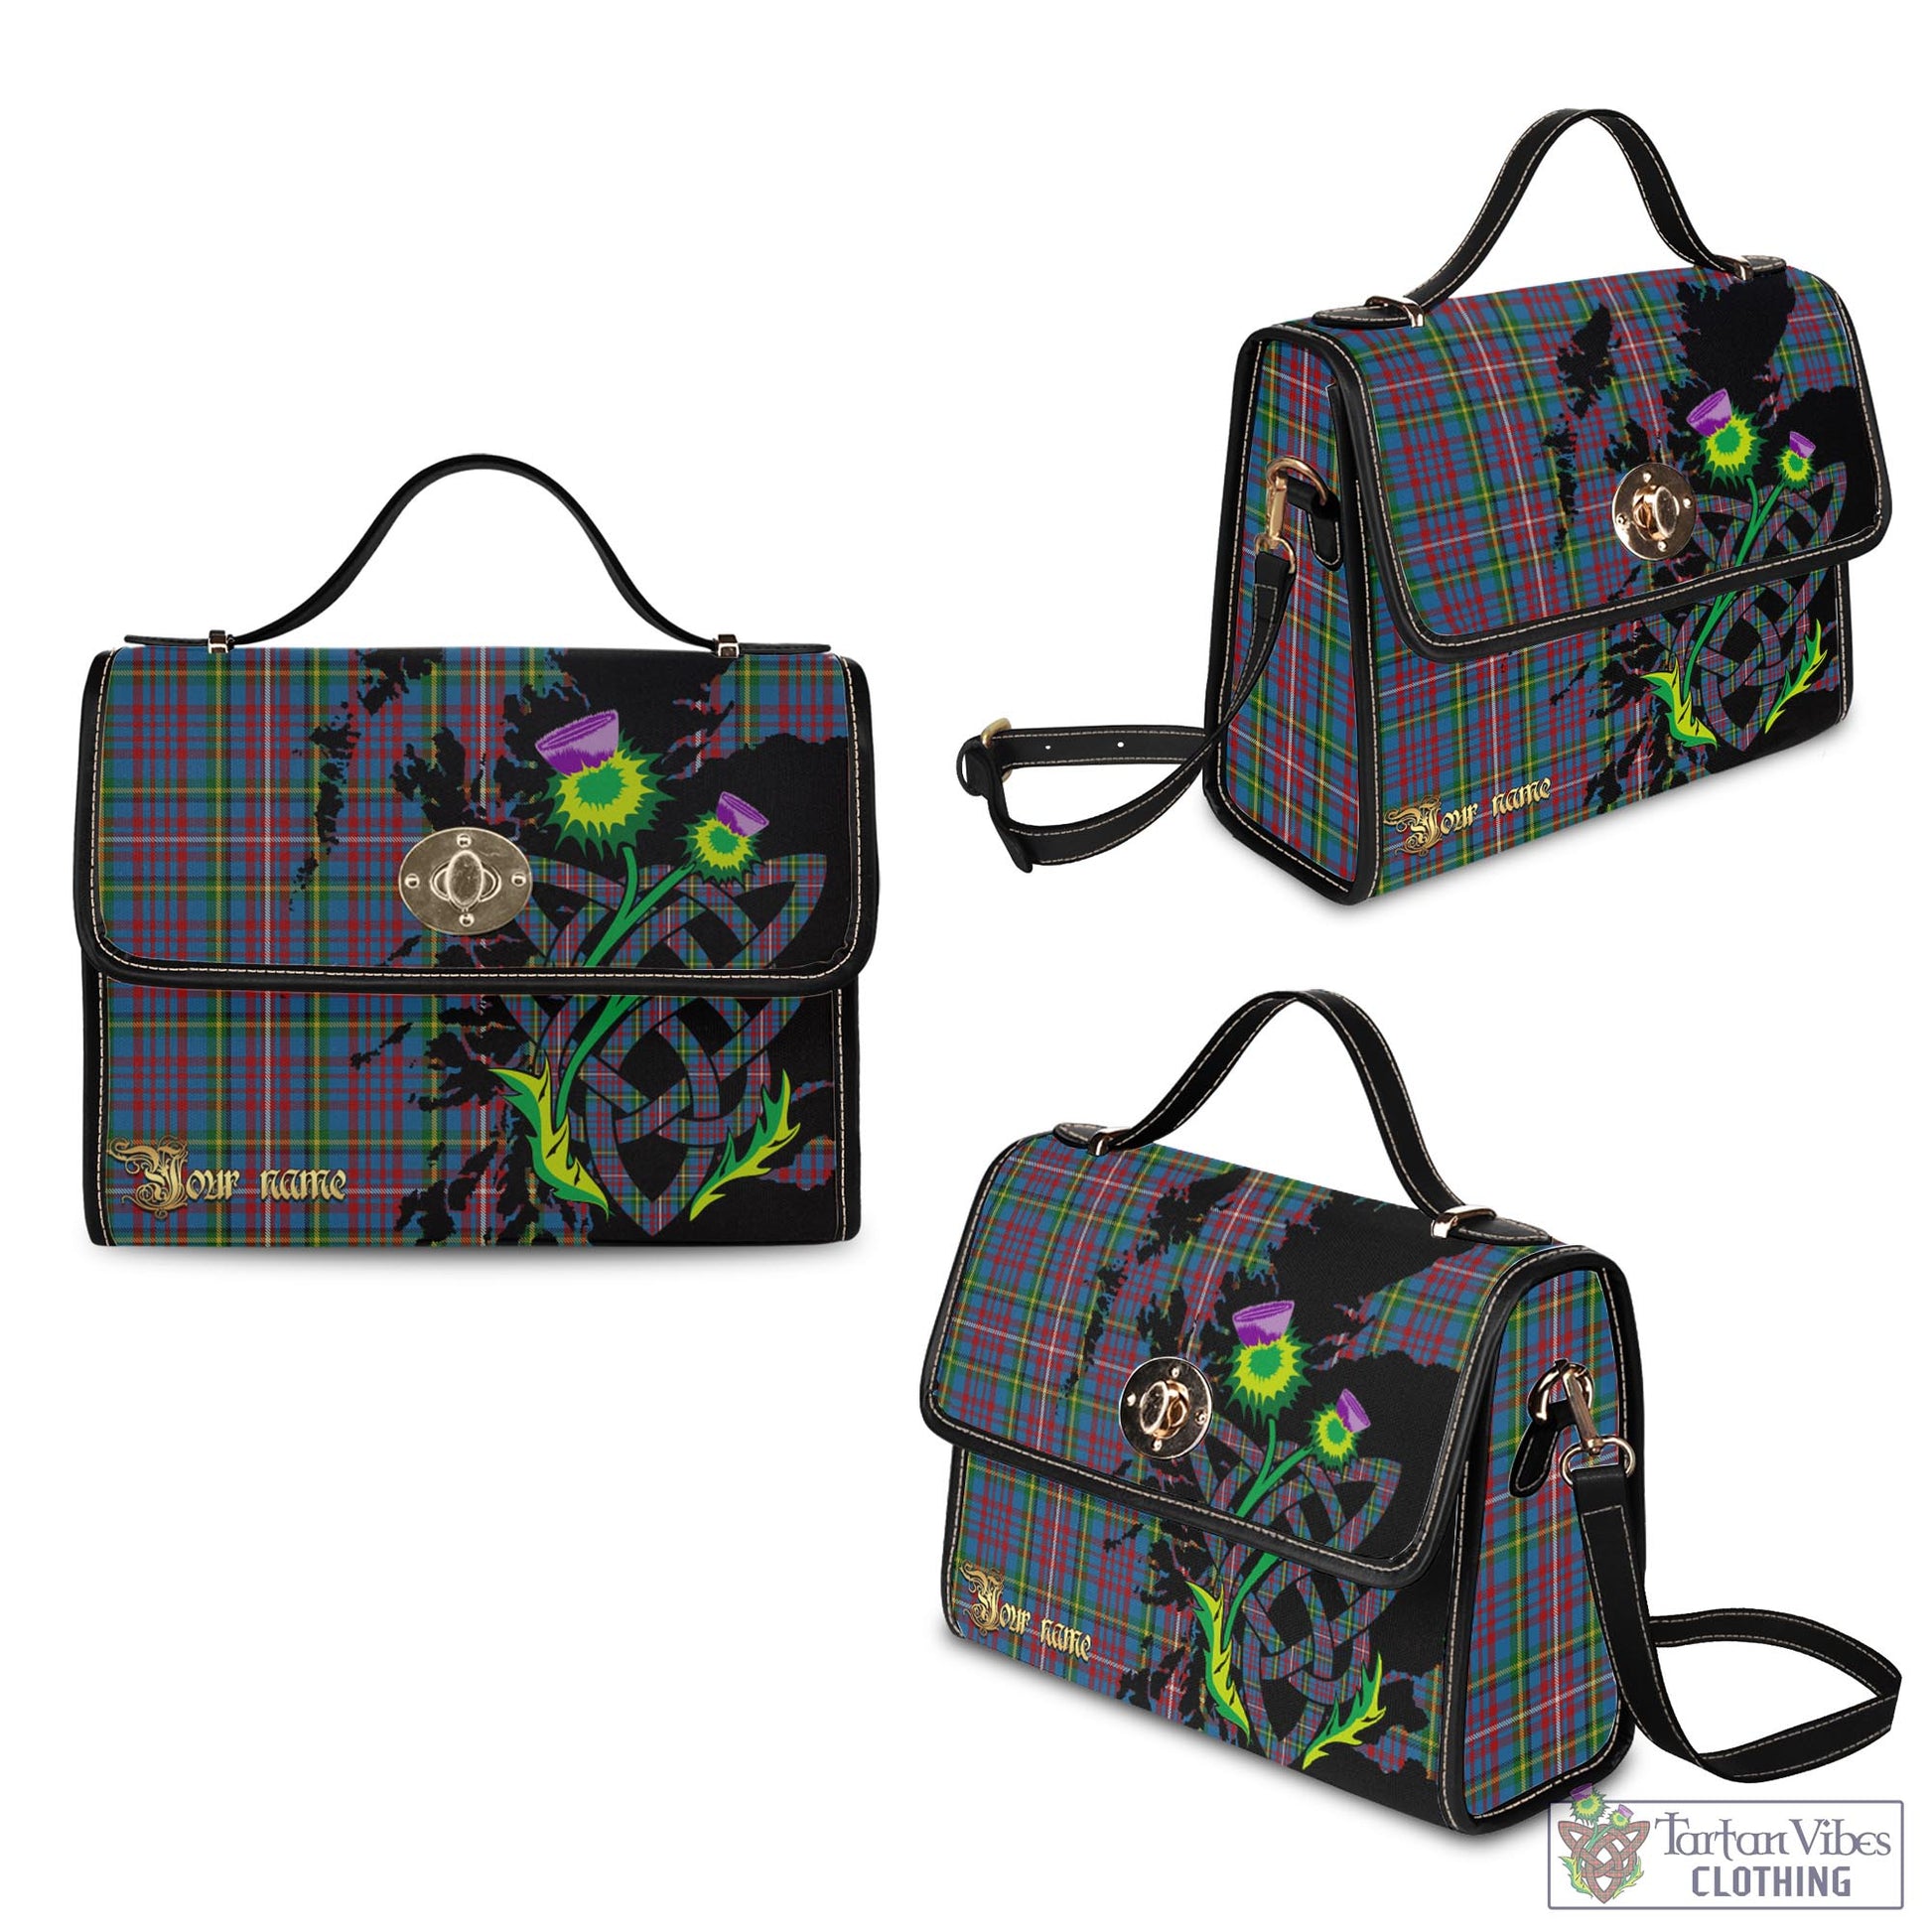 Tartan Vibes Clothing Hyndman Tartan Waterproof Canvas Bag with Scotland Map and Thistle Celtic Accents